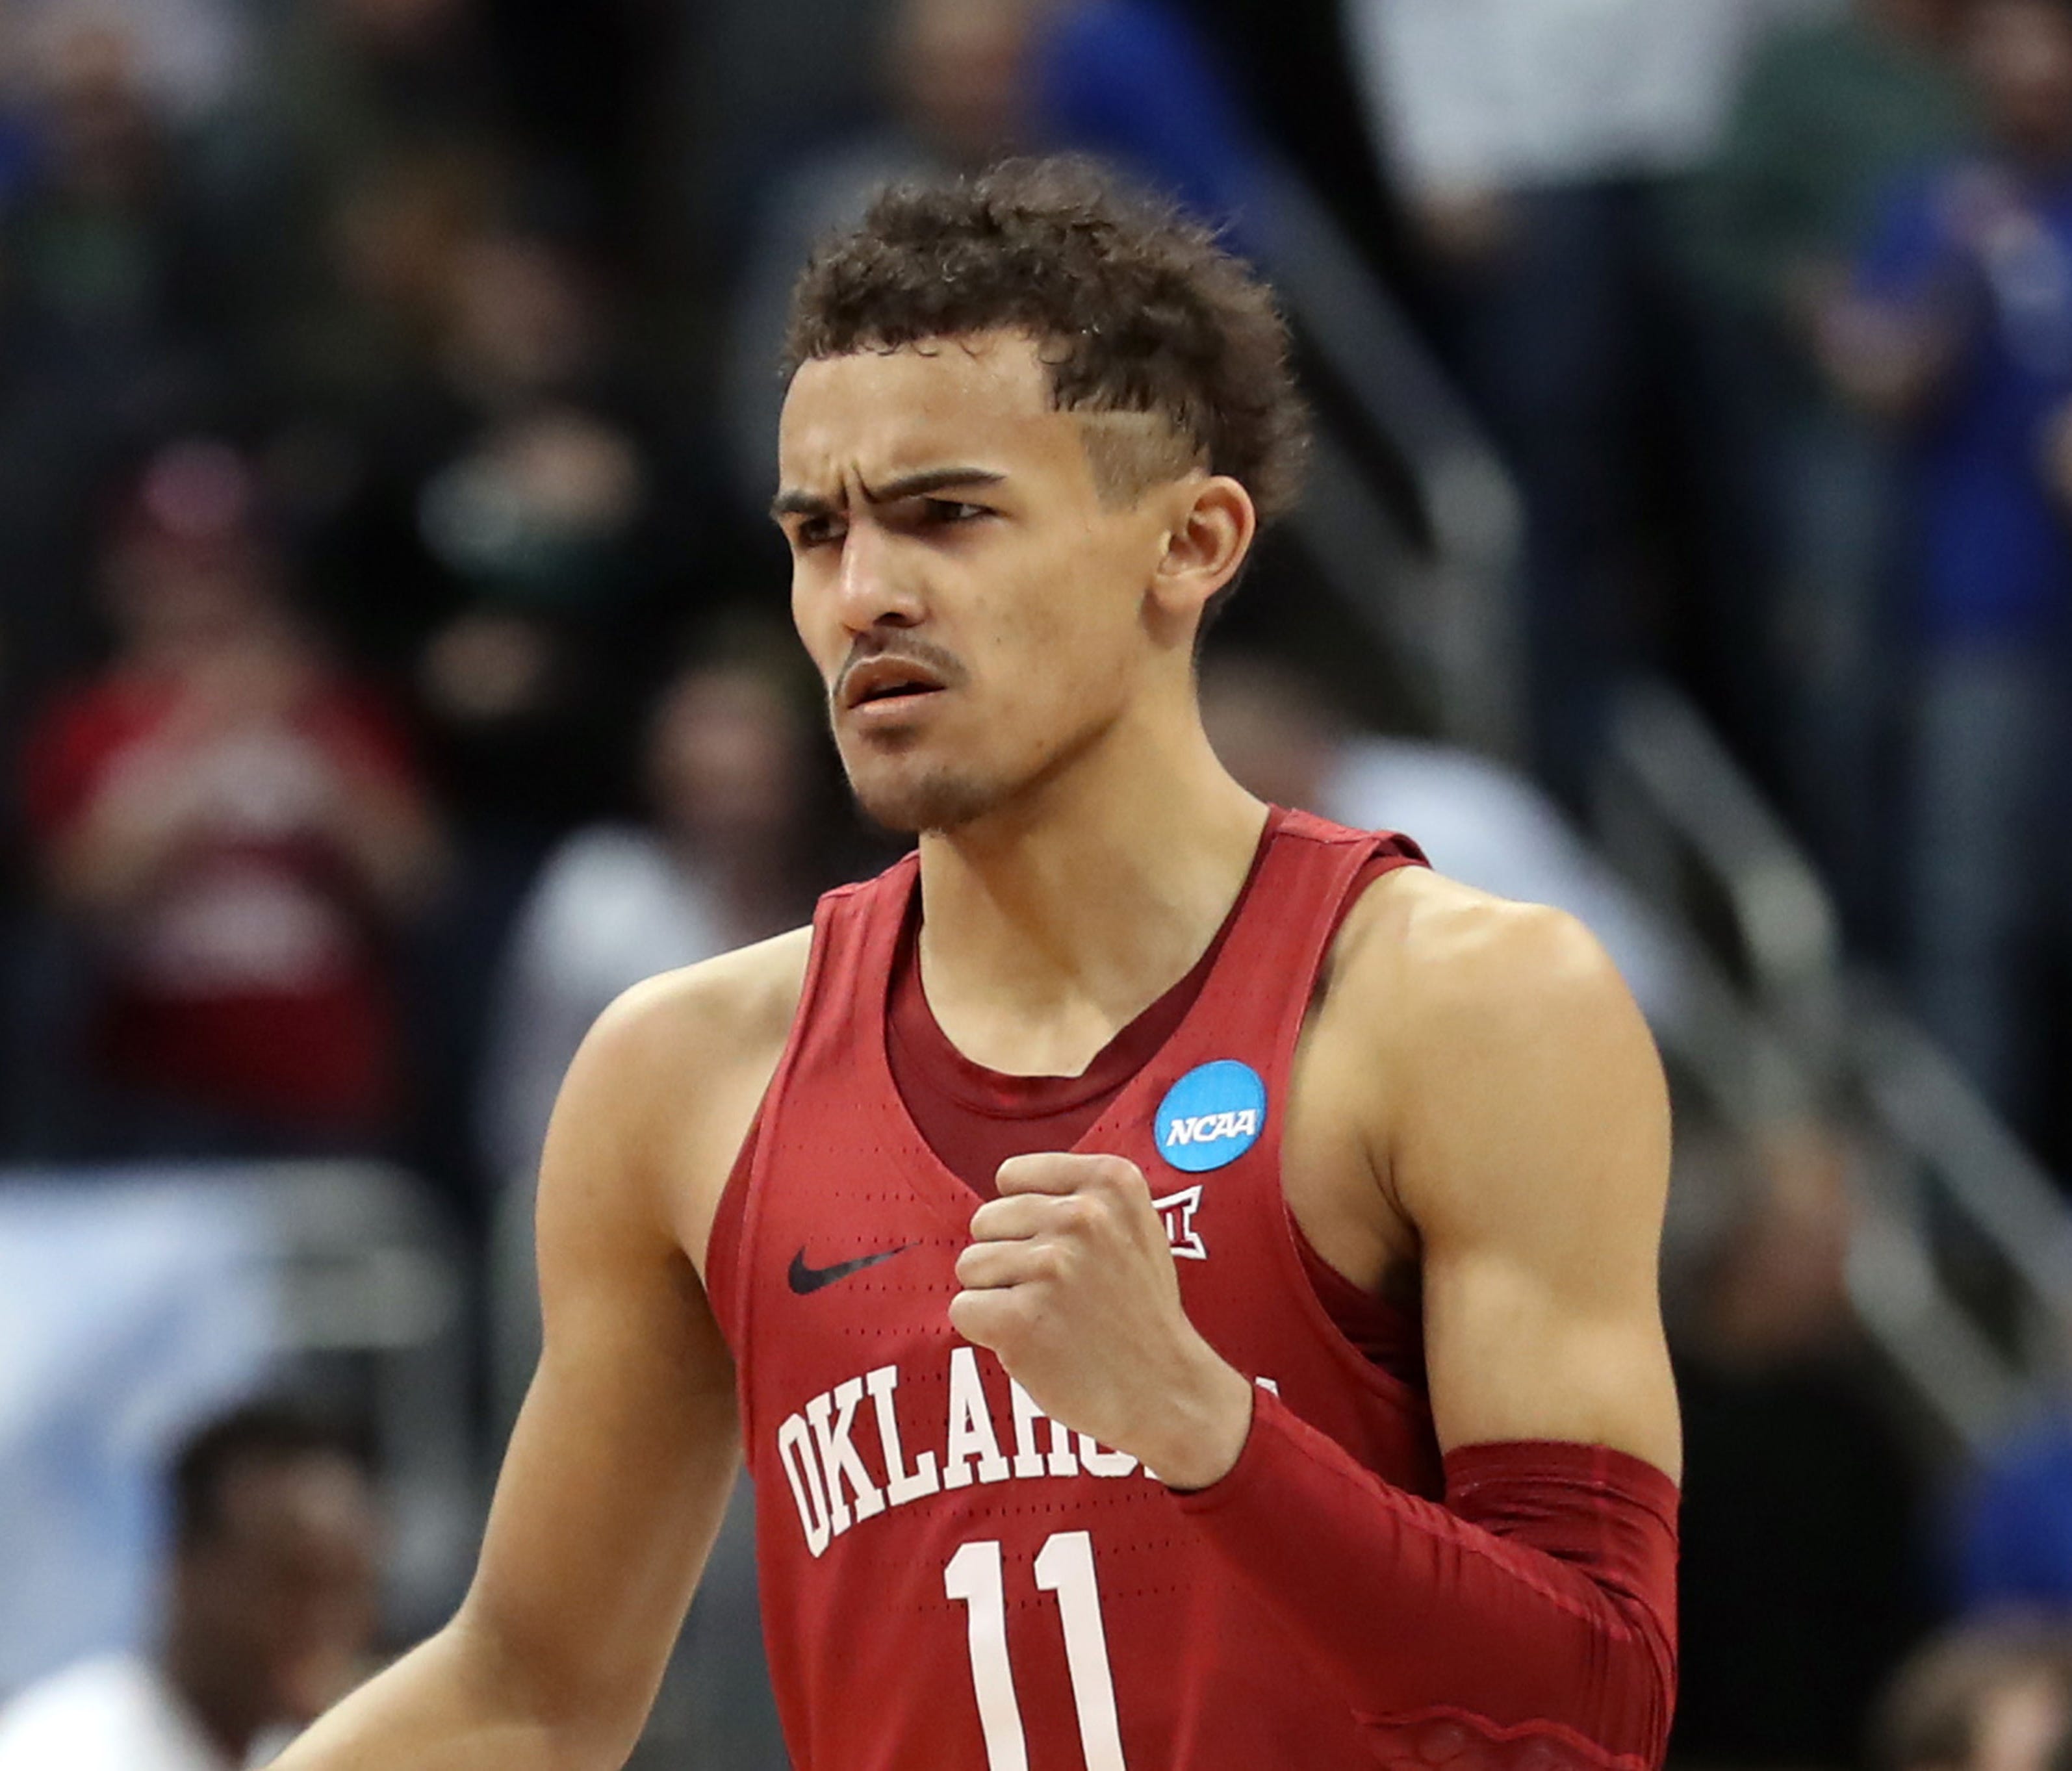 Oklahoma Sooners guard Trae Young (11) reacts after a play against the Rhode Island Rams during the second half in the first round of the 2018 NCAA Tournament at PPG Paints Arena.